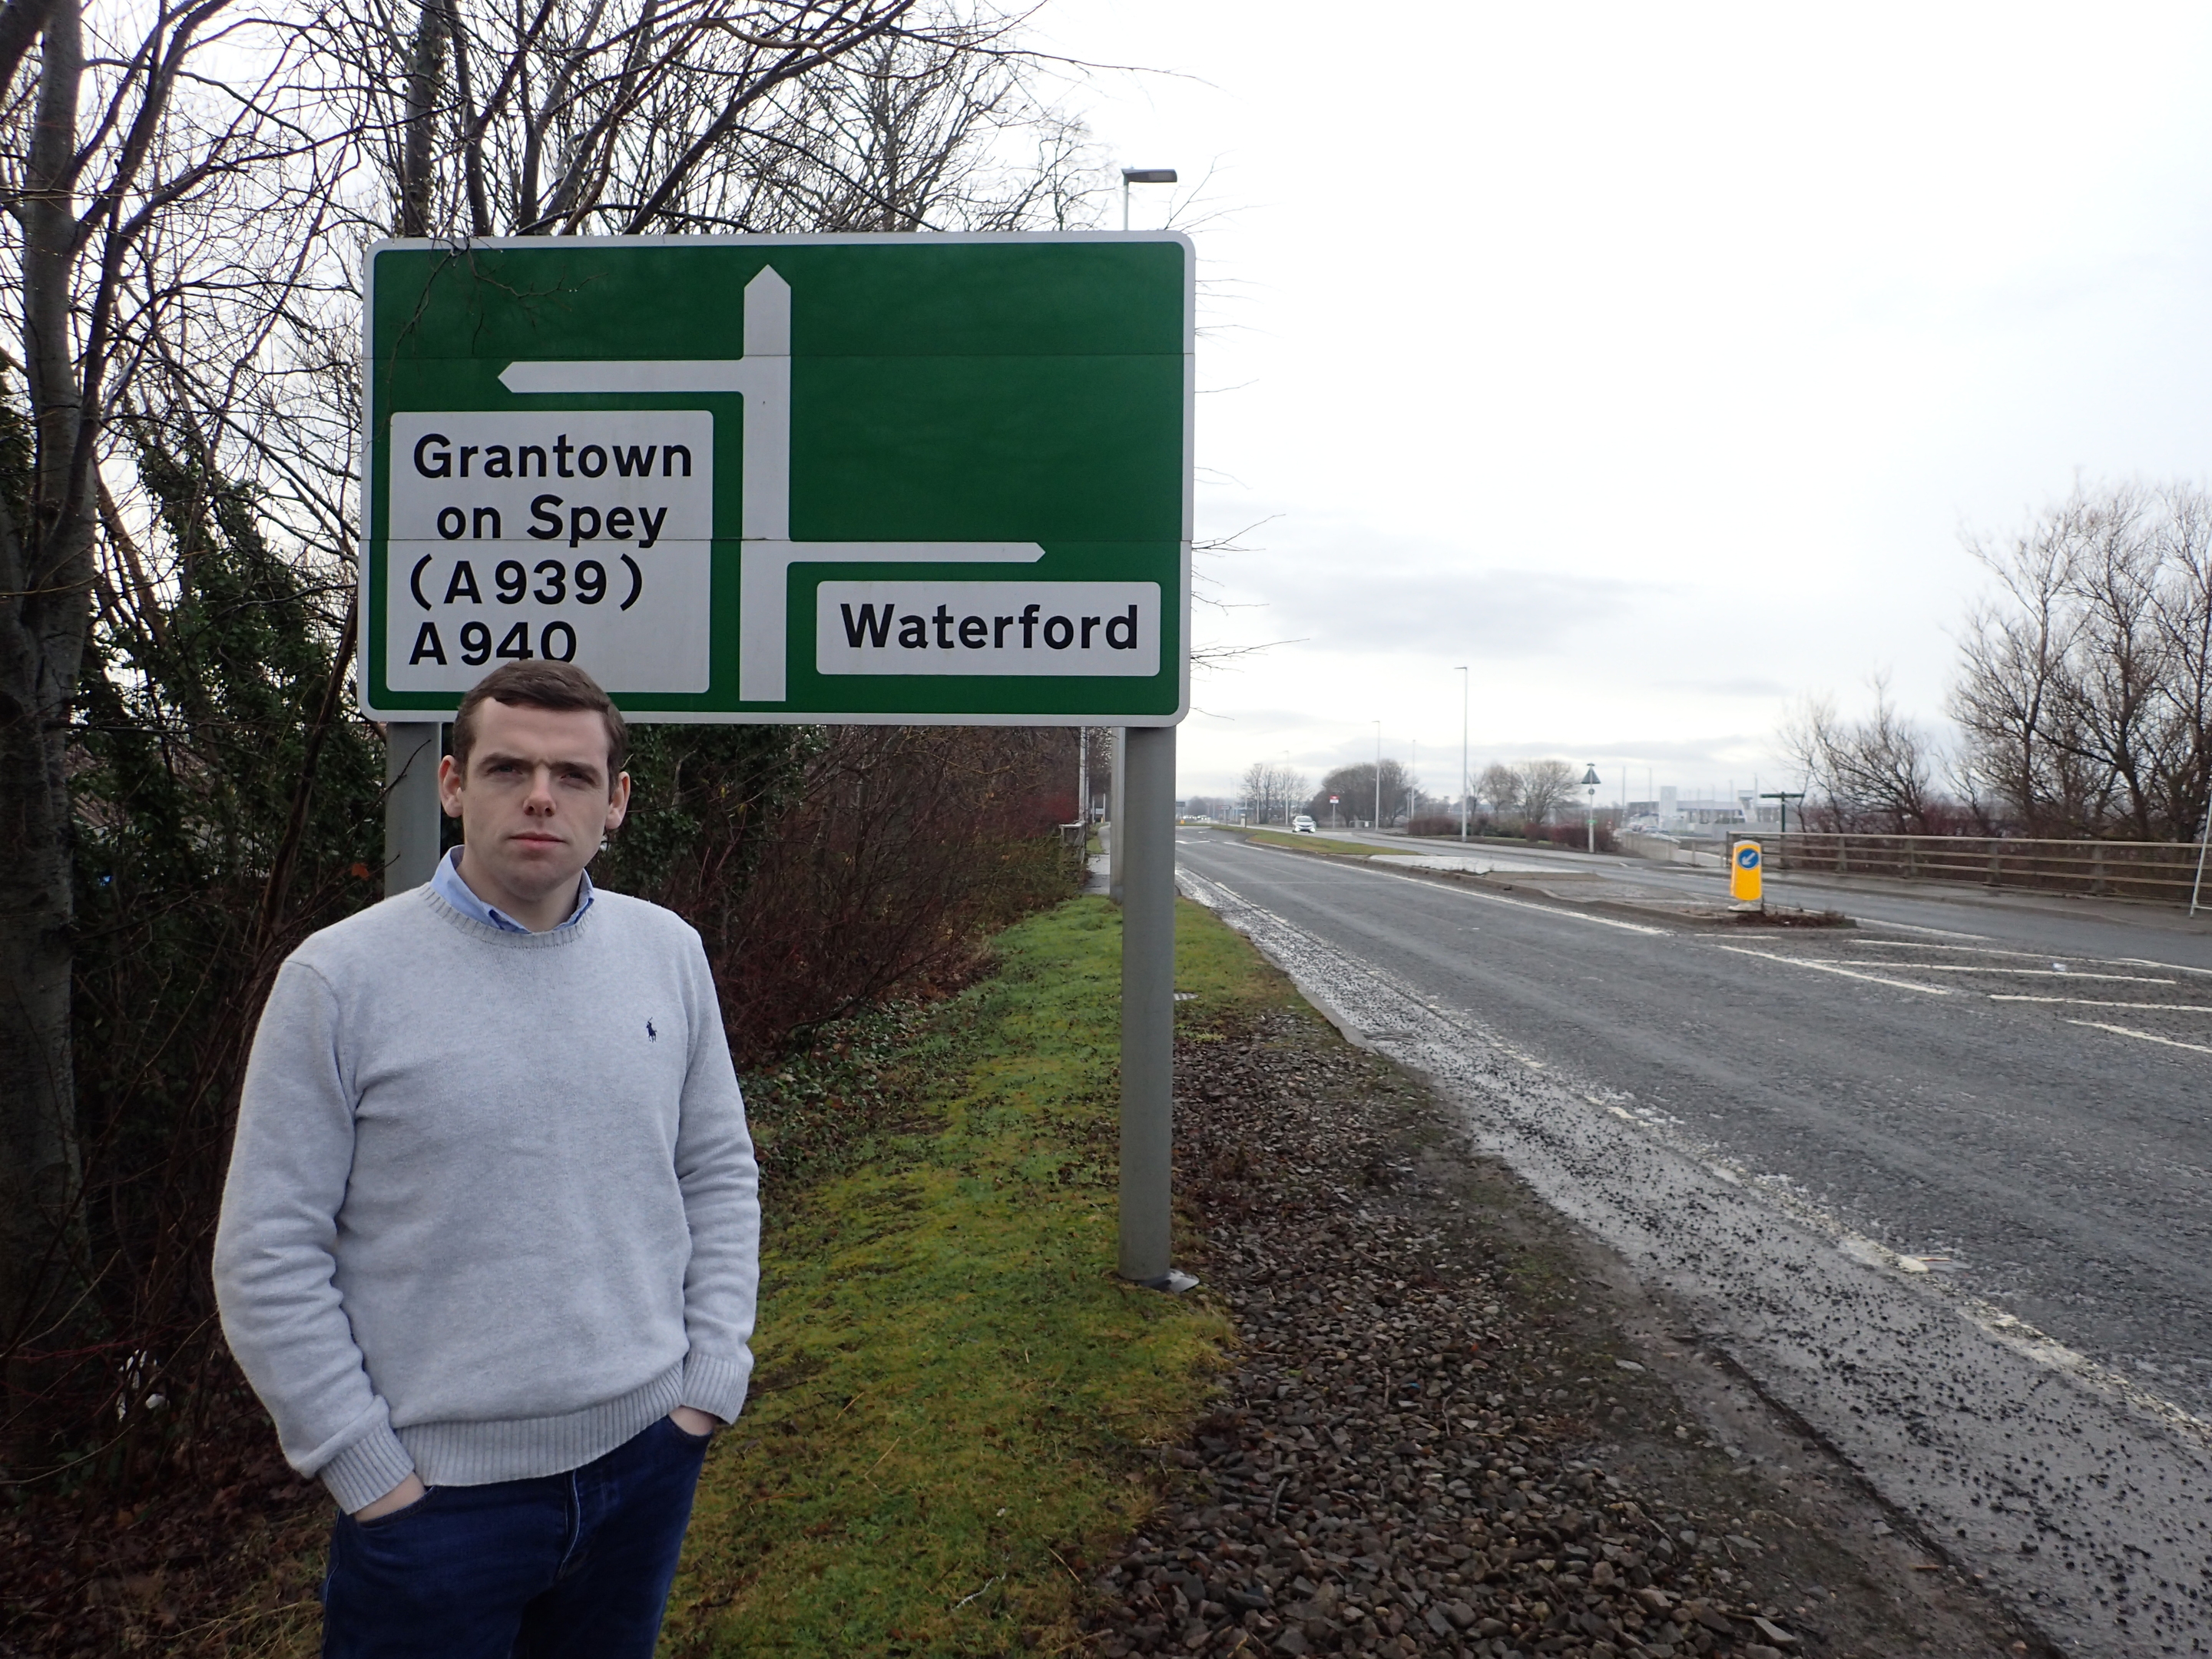 Moray MP Douglas Ross has asked Transport Scotland to consider changes to the signs.